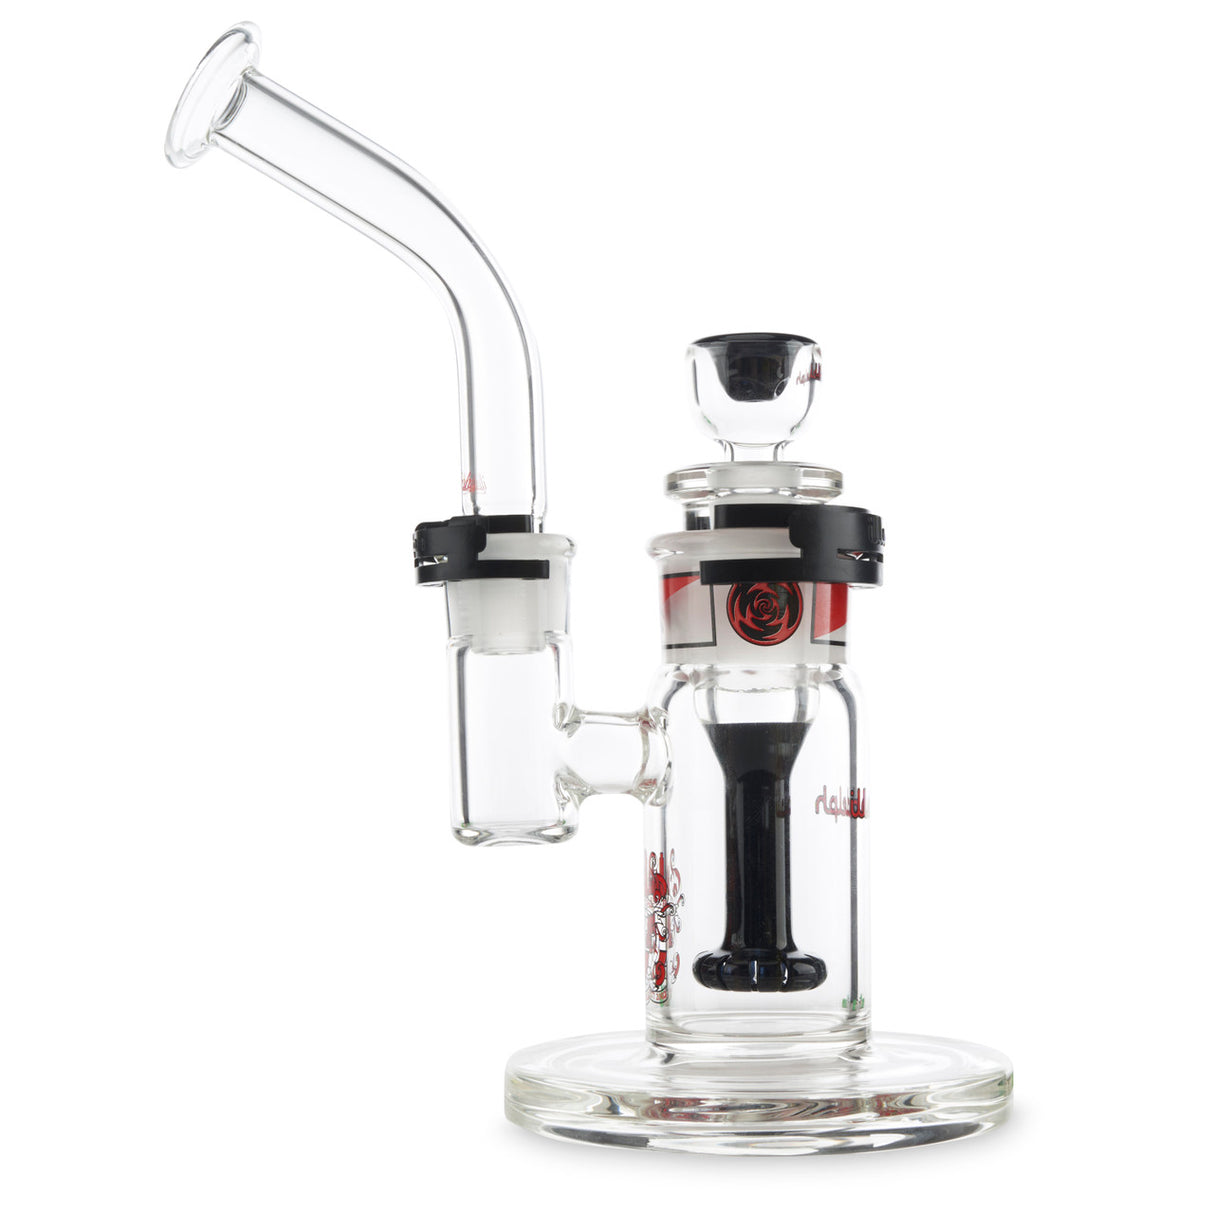 illadelph glass bubbler Black and Red high end american made glass